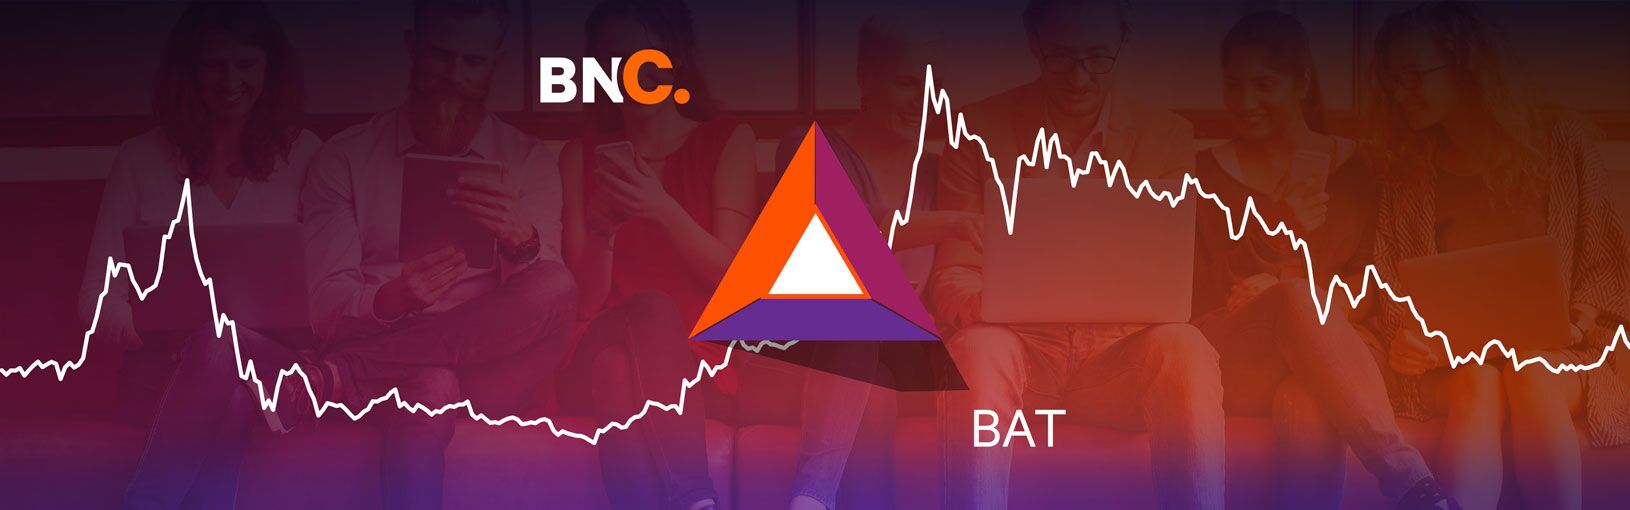 Basic Attention Token Price | BAT Price Index and Live Chart - CoinDesk